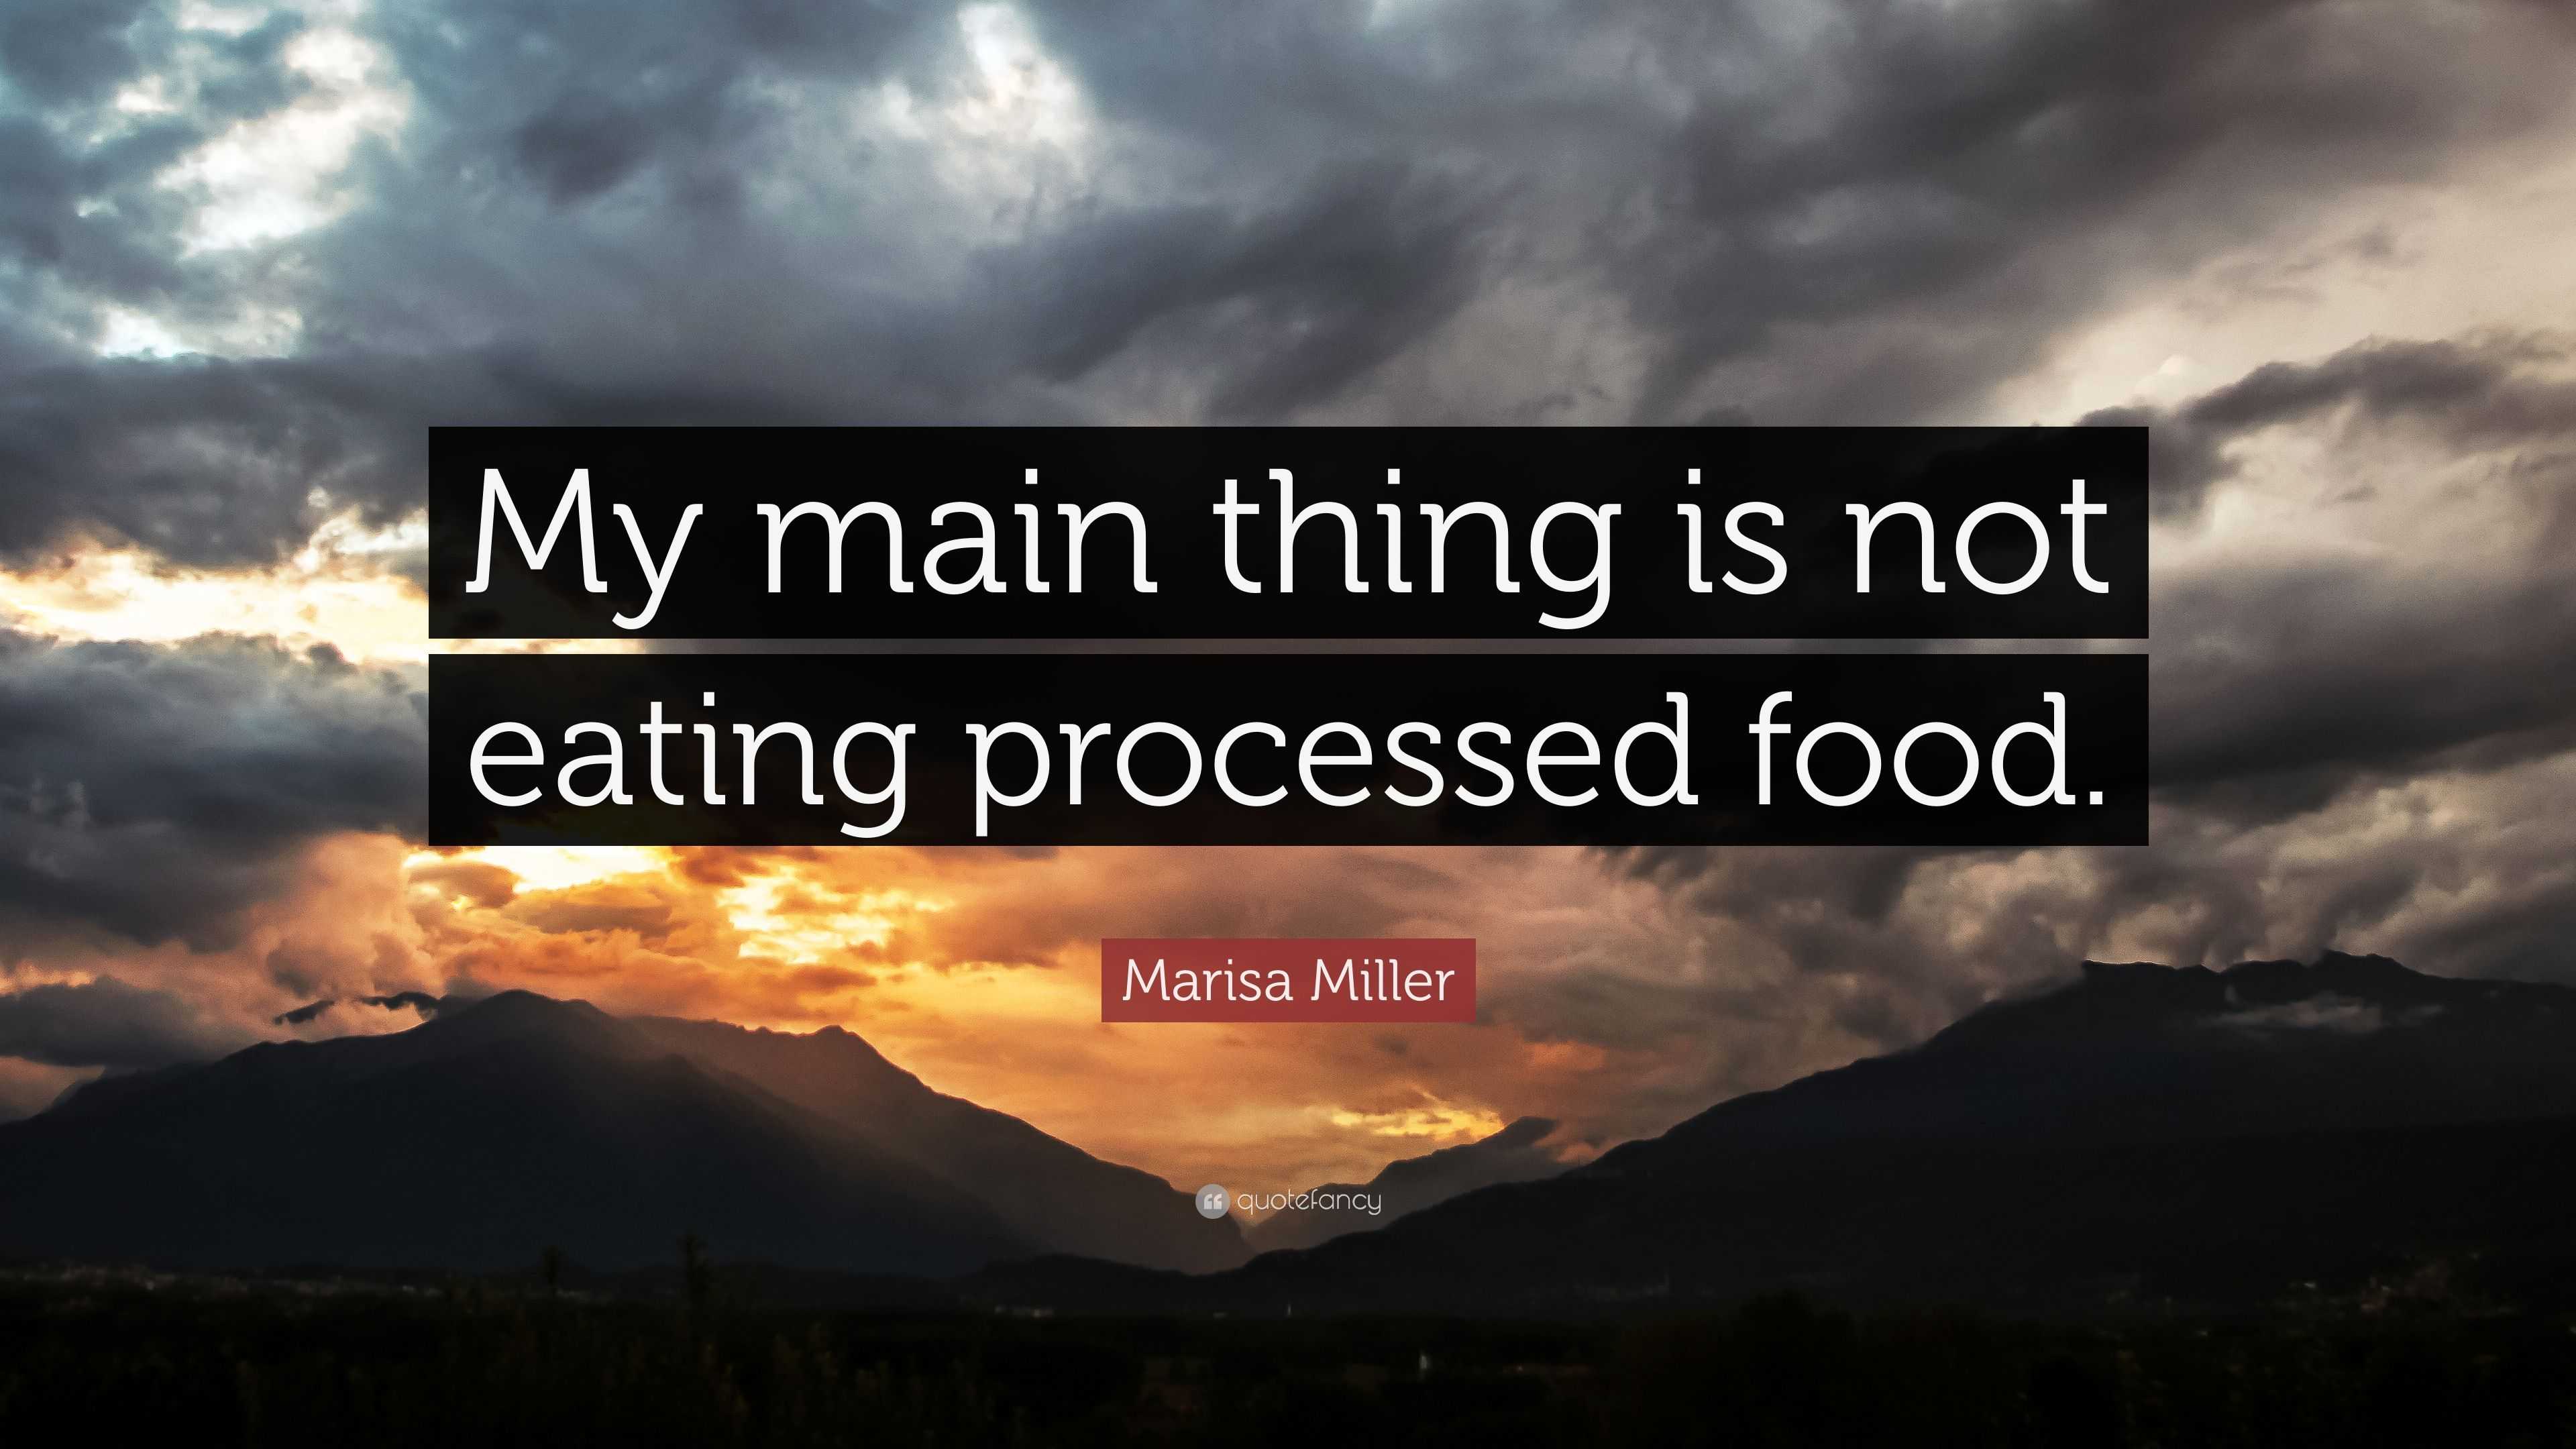 Marisa Miller Quote: “My main thing is not eating processed food.”